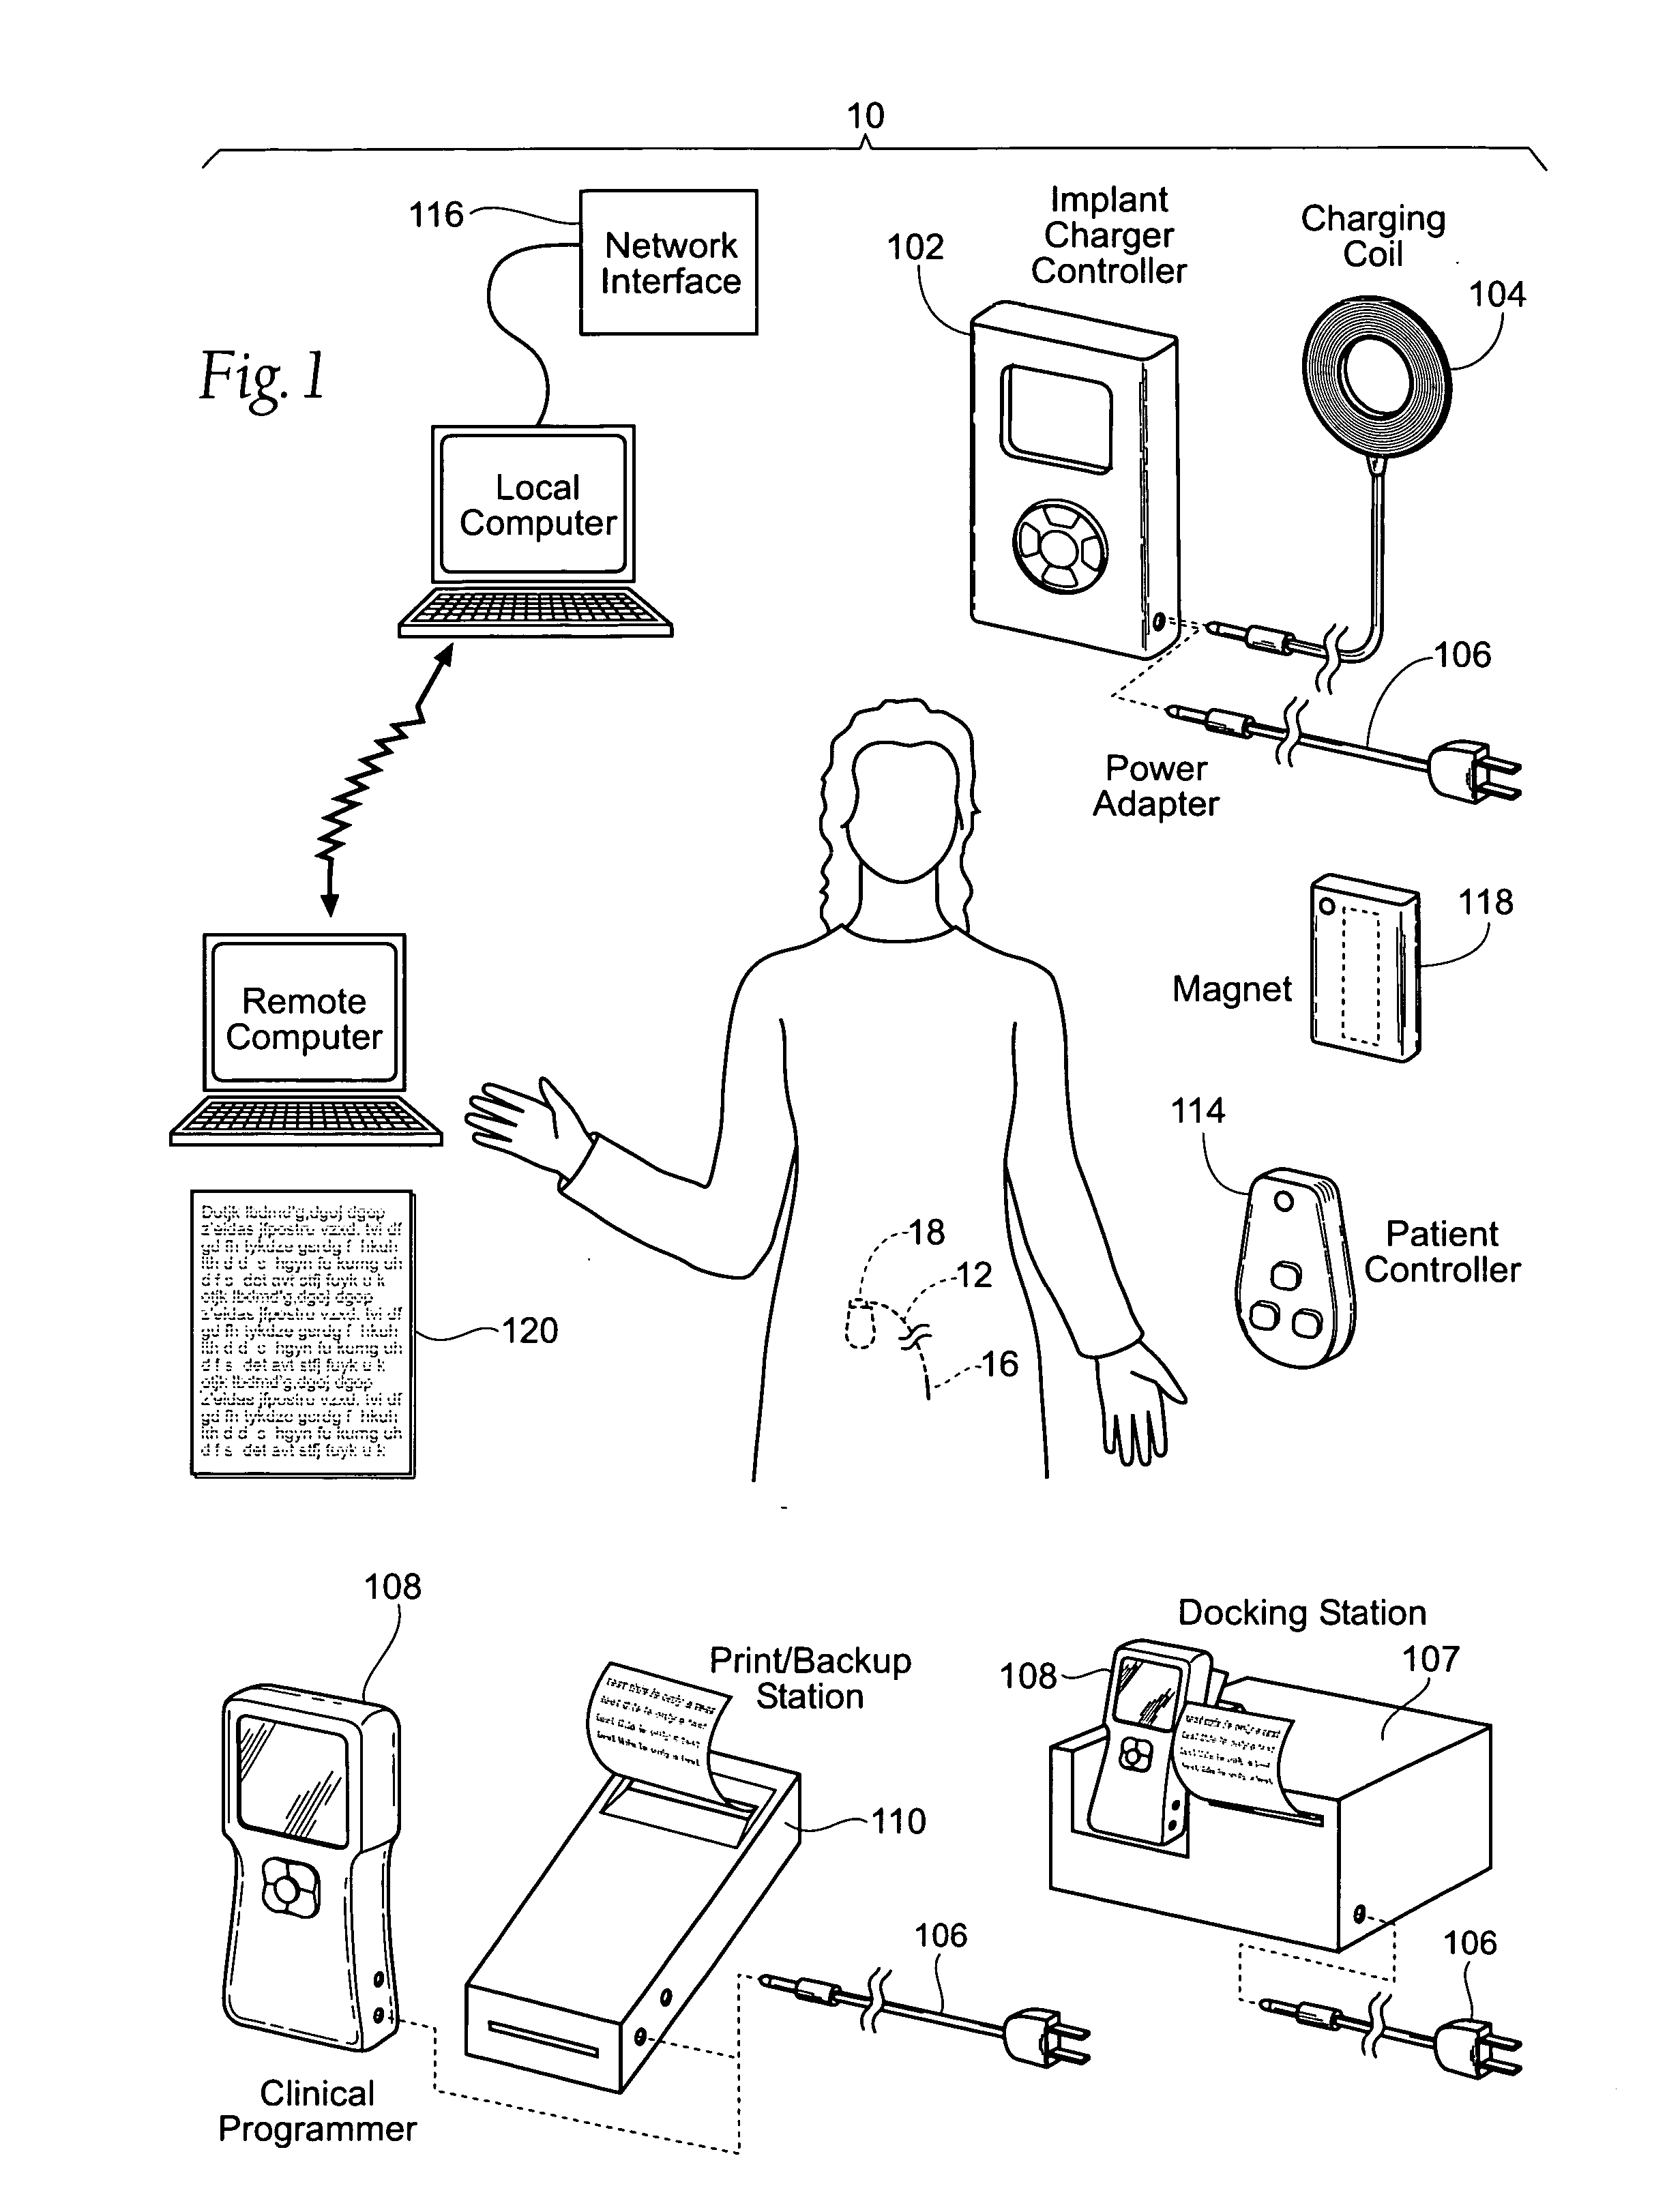 Implantable pulse generator systems and methods for providing functional and/or therapeutic stimulation of muscles and/or nerves and/or central nervous system tissue